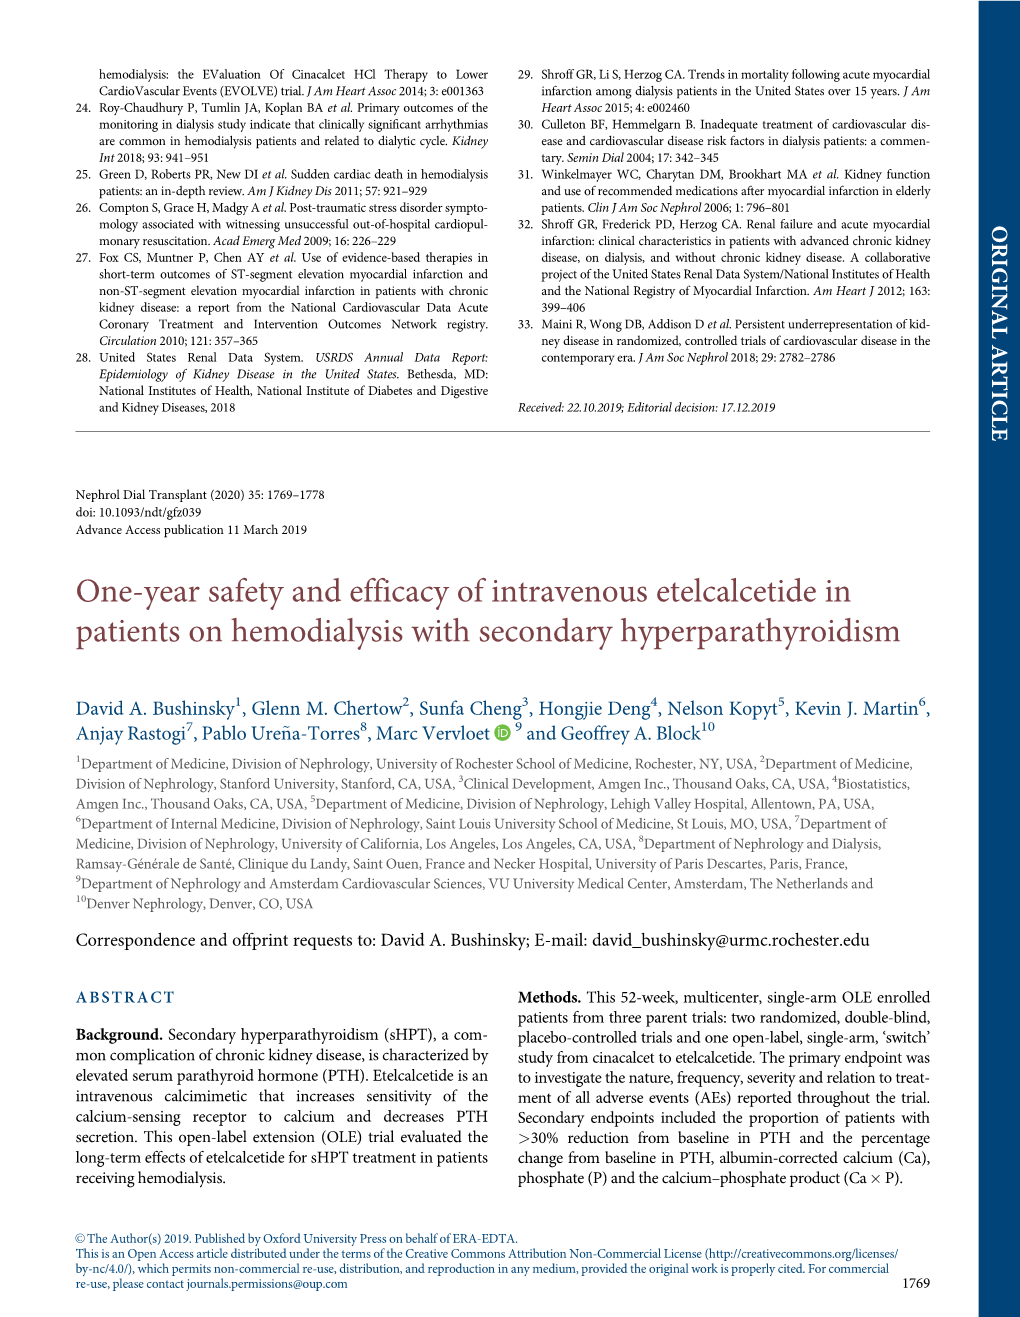 One-Year Safety and Efficacy of Intravenous Etelcalcetide in Patients on Hemodialysis with Secondary Hyperparathyroidism